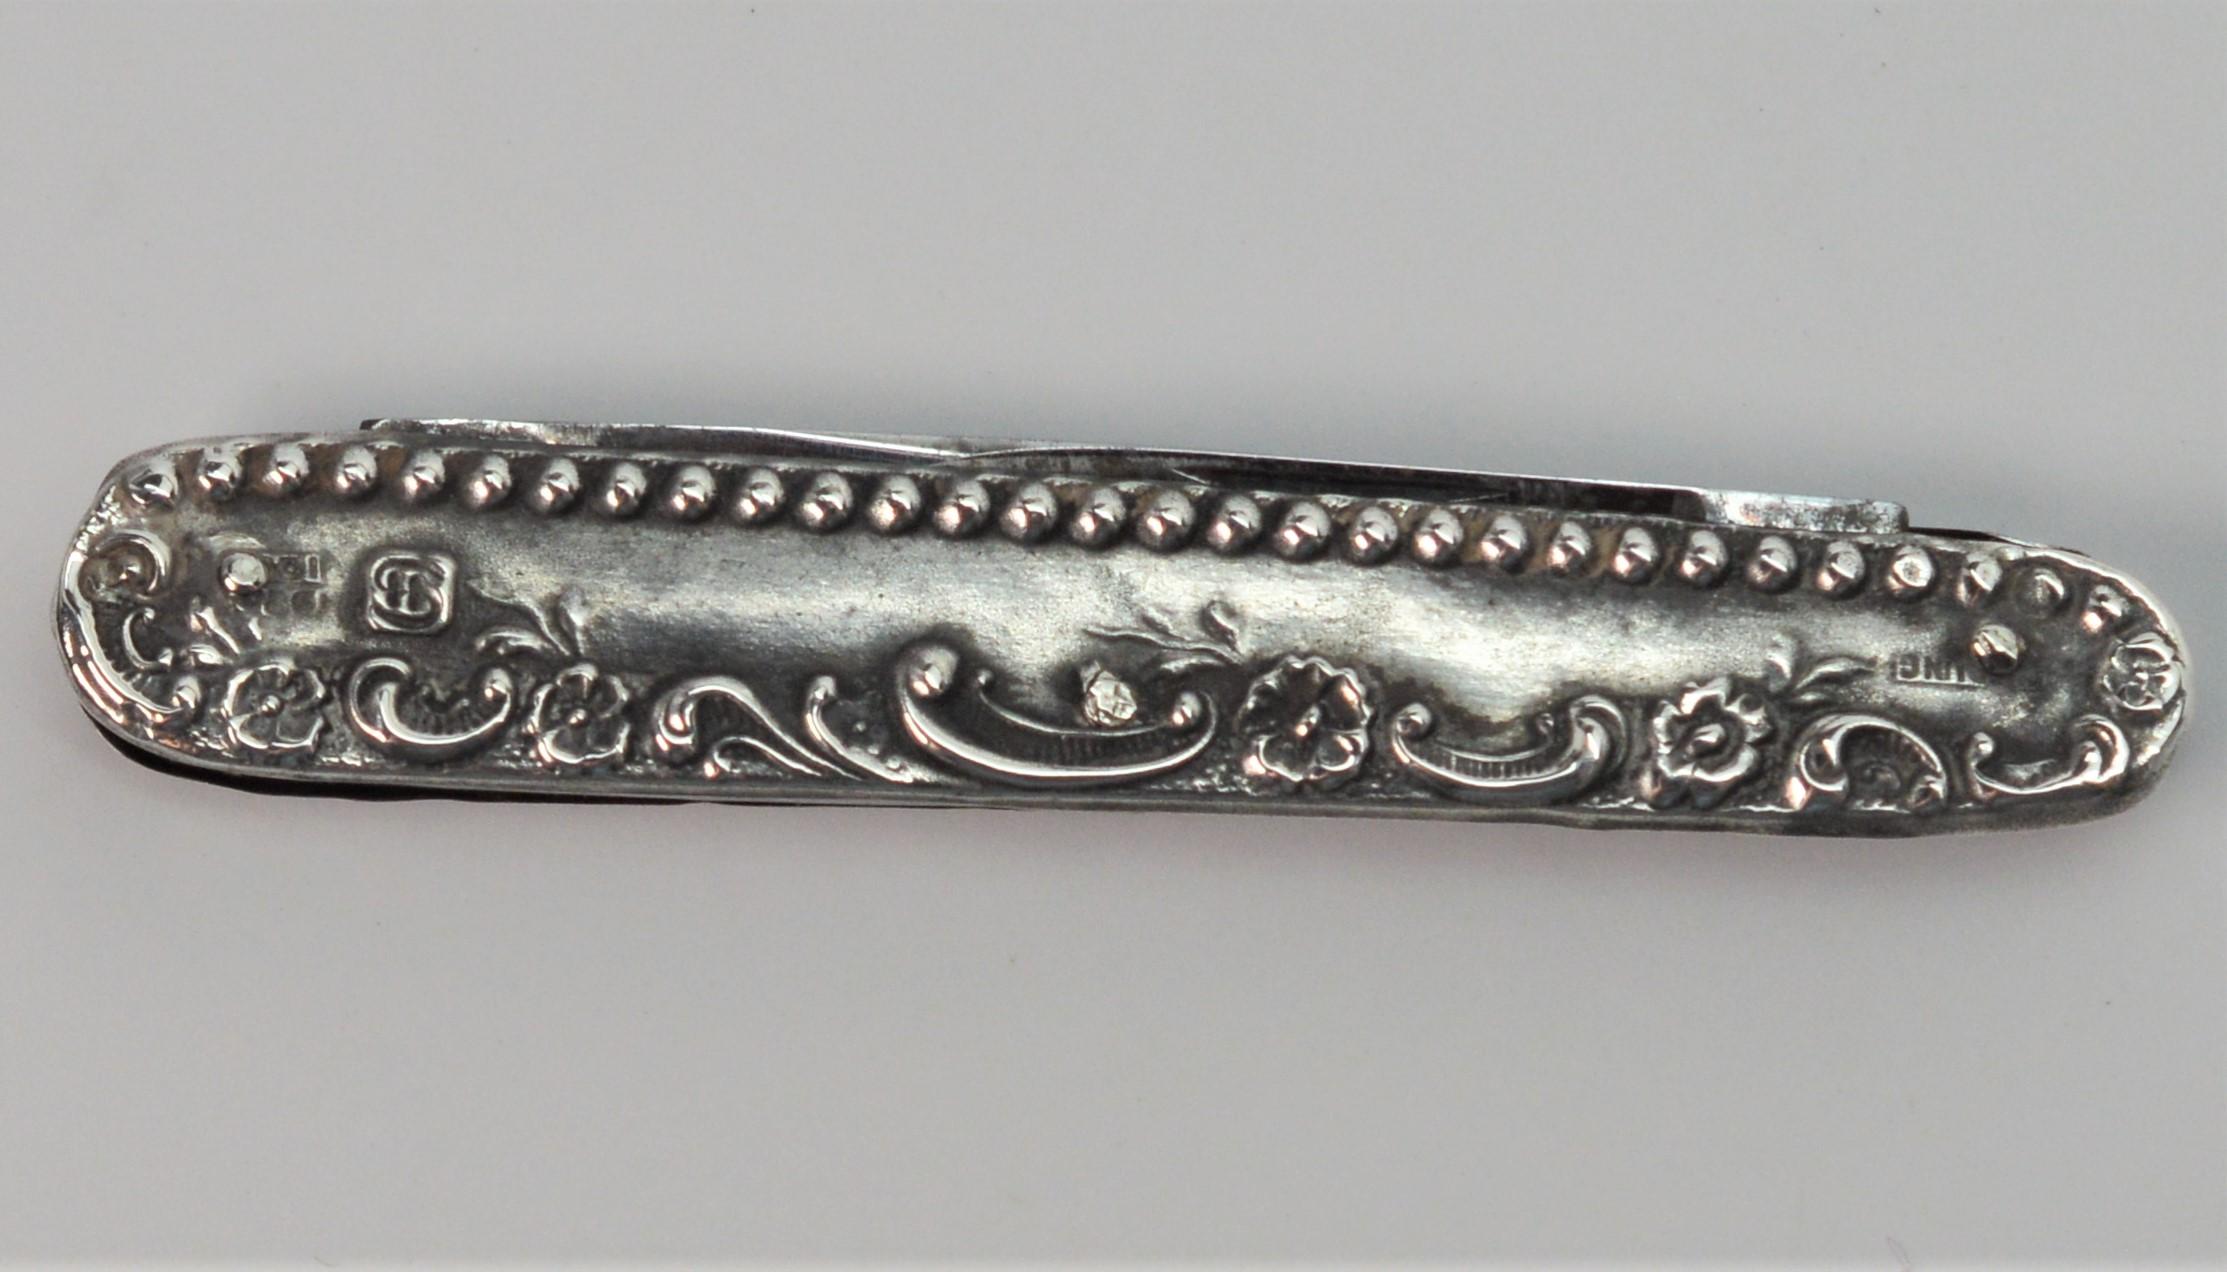 In its original condition, this 2-1/4 inch Gentleman's Antique Sterling Silver Pocket Knife has two small folding steel blades including a one inch blade and a three-quarter inch blade. Has unknown hallmarks and is signed 